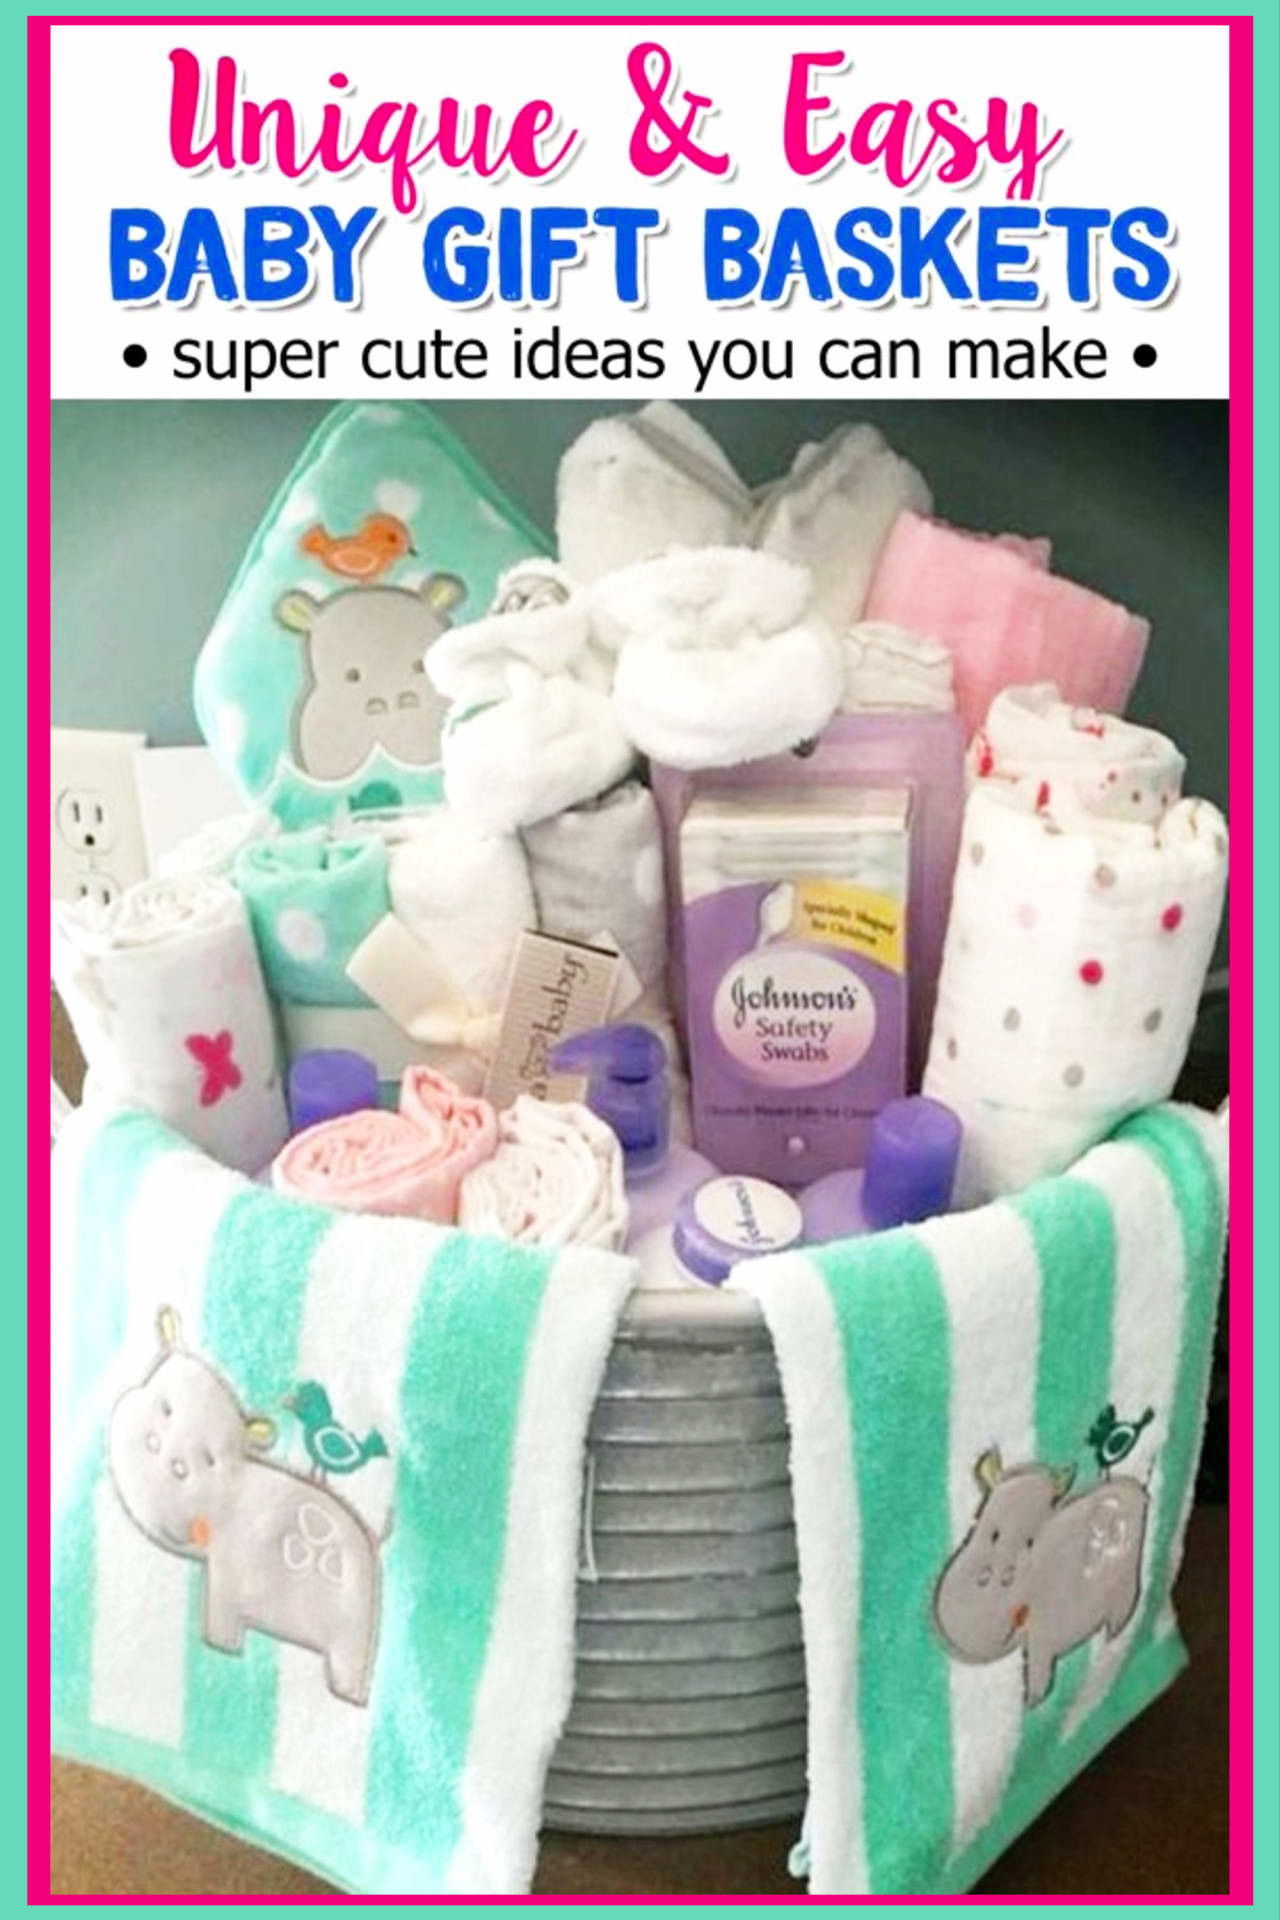 Baby Shower Homemade Gift Ideas
 28 Affordable & Cheap Baby Shower Gift Ideas For Those on